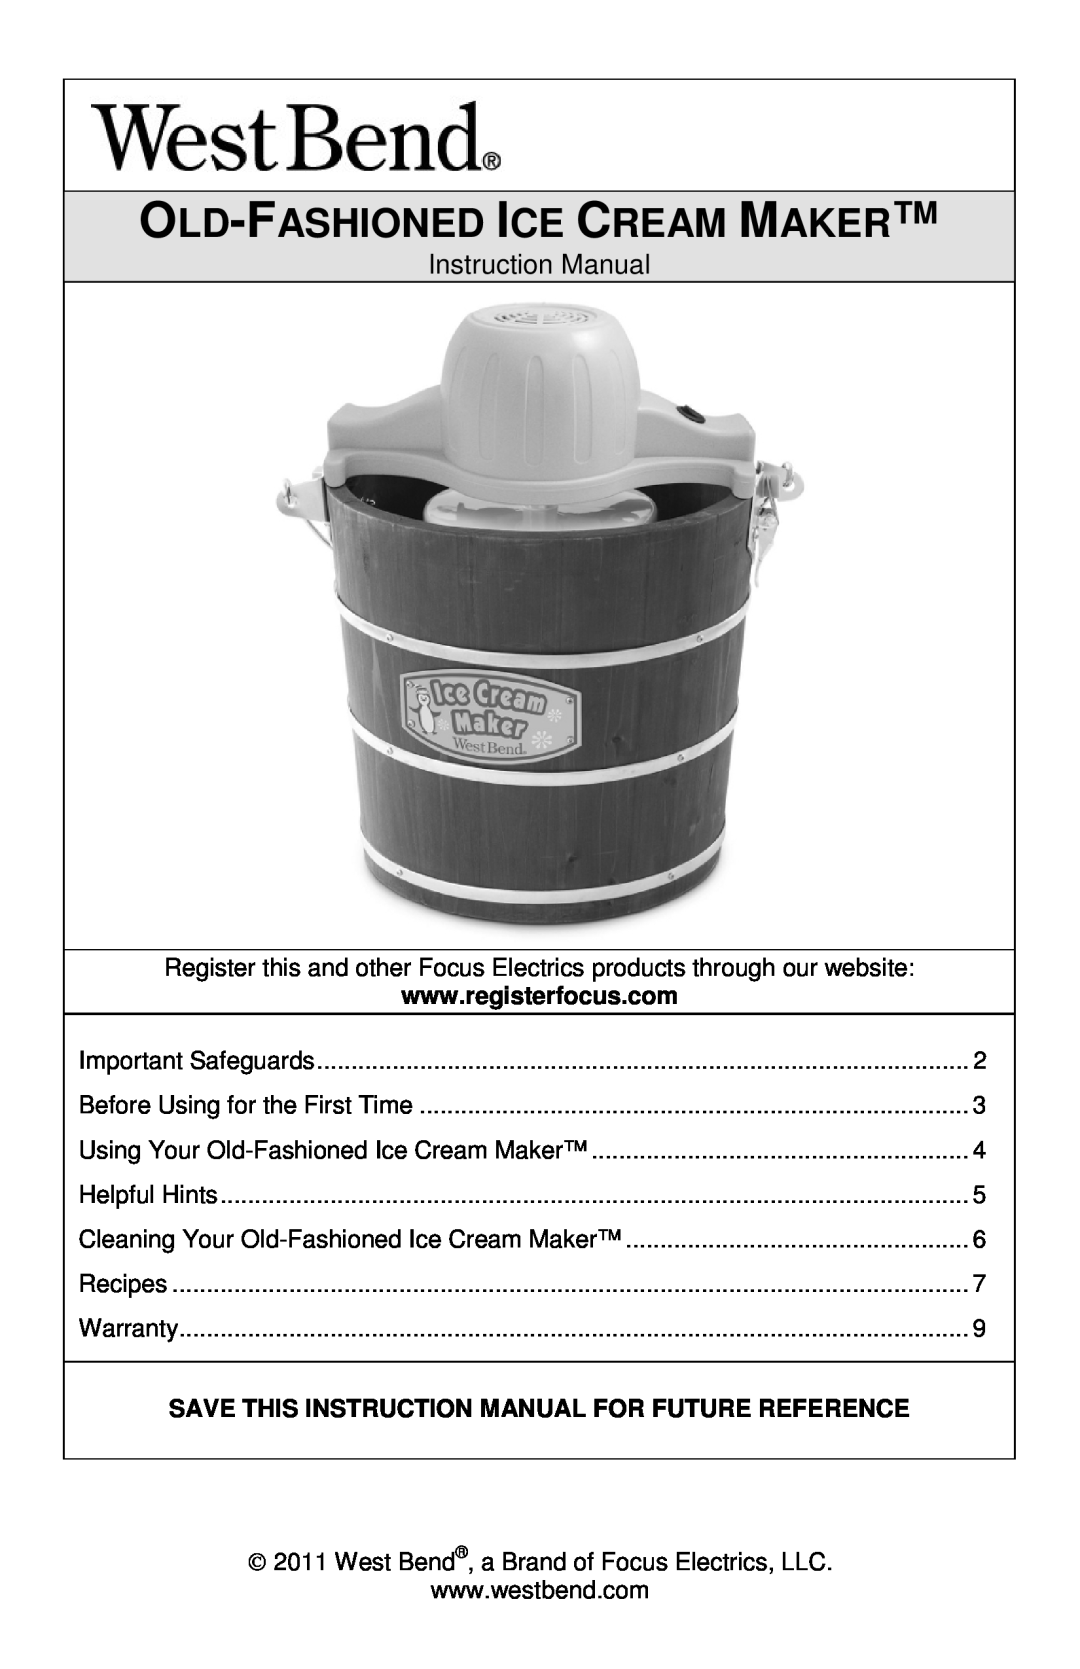 West Bend IC12701 instruction manual Old-Fashioned Ice Cream Maker 